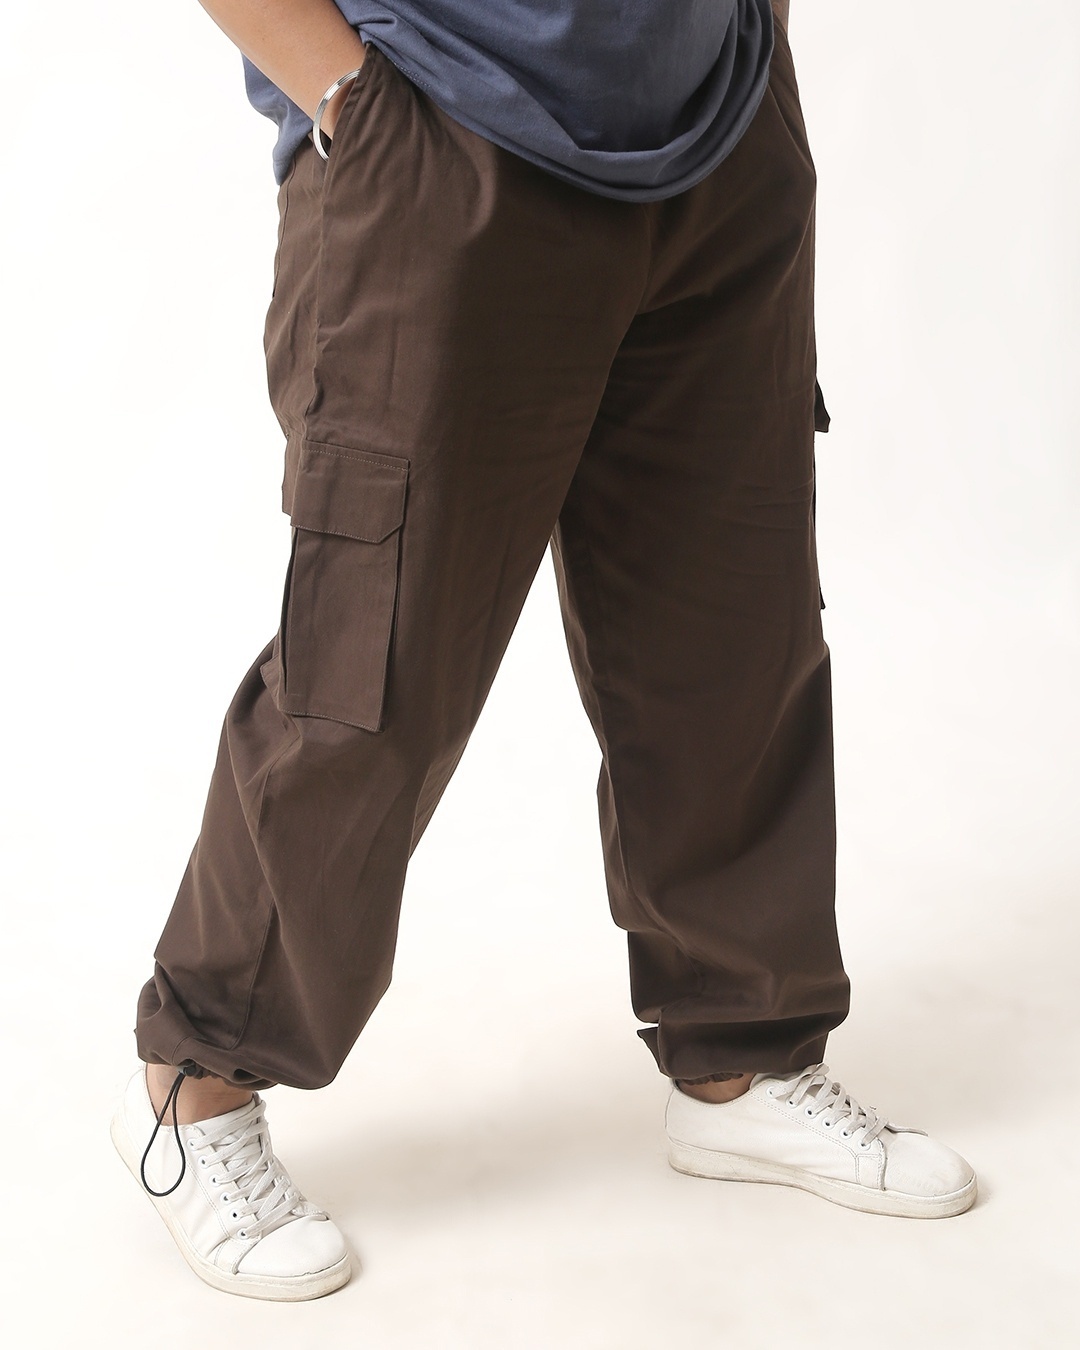 Olive green shirts paired with Men's Coffee Brown Loose Comfort Fit Cargo Parachute Pants